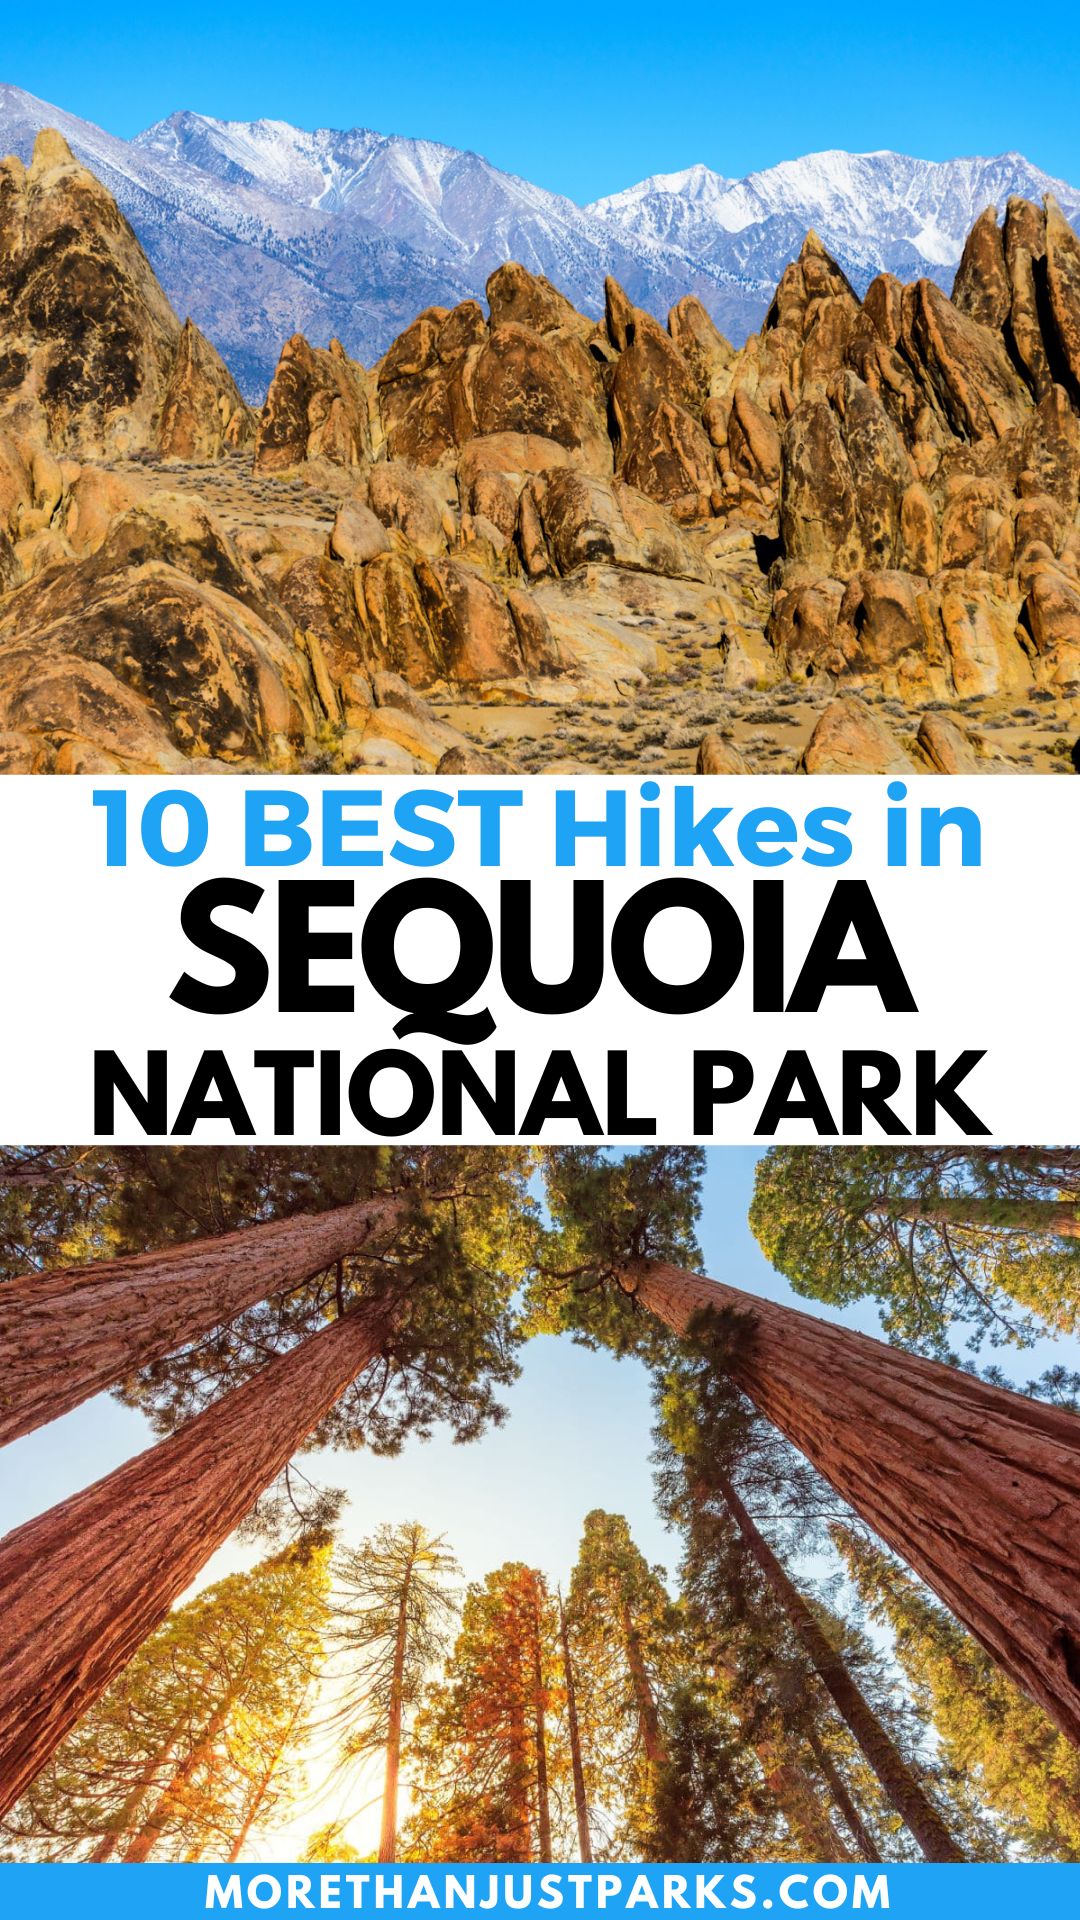 Graphic reads "10 Best Hikes in Sequoia National Park."